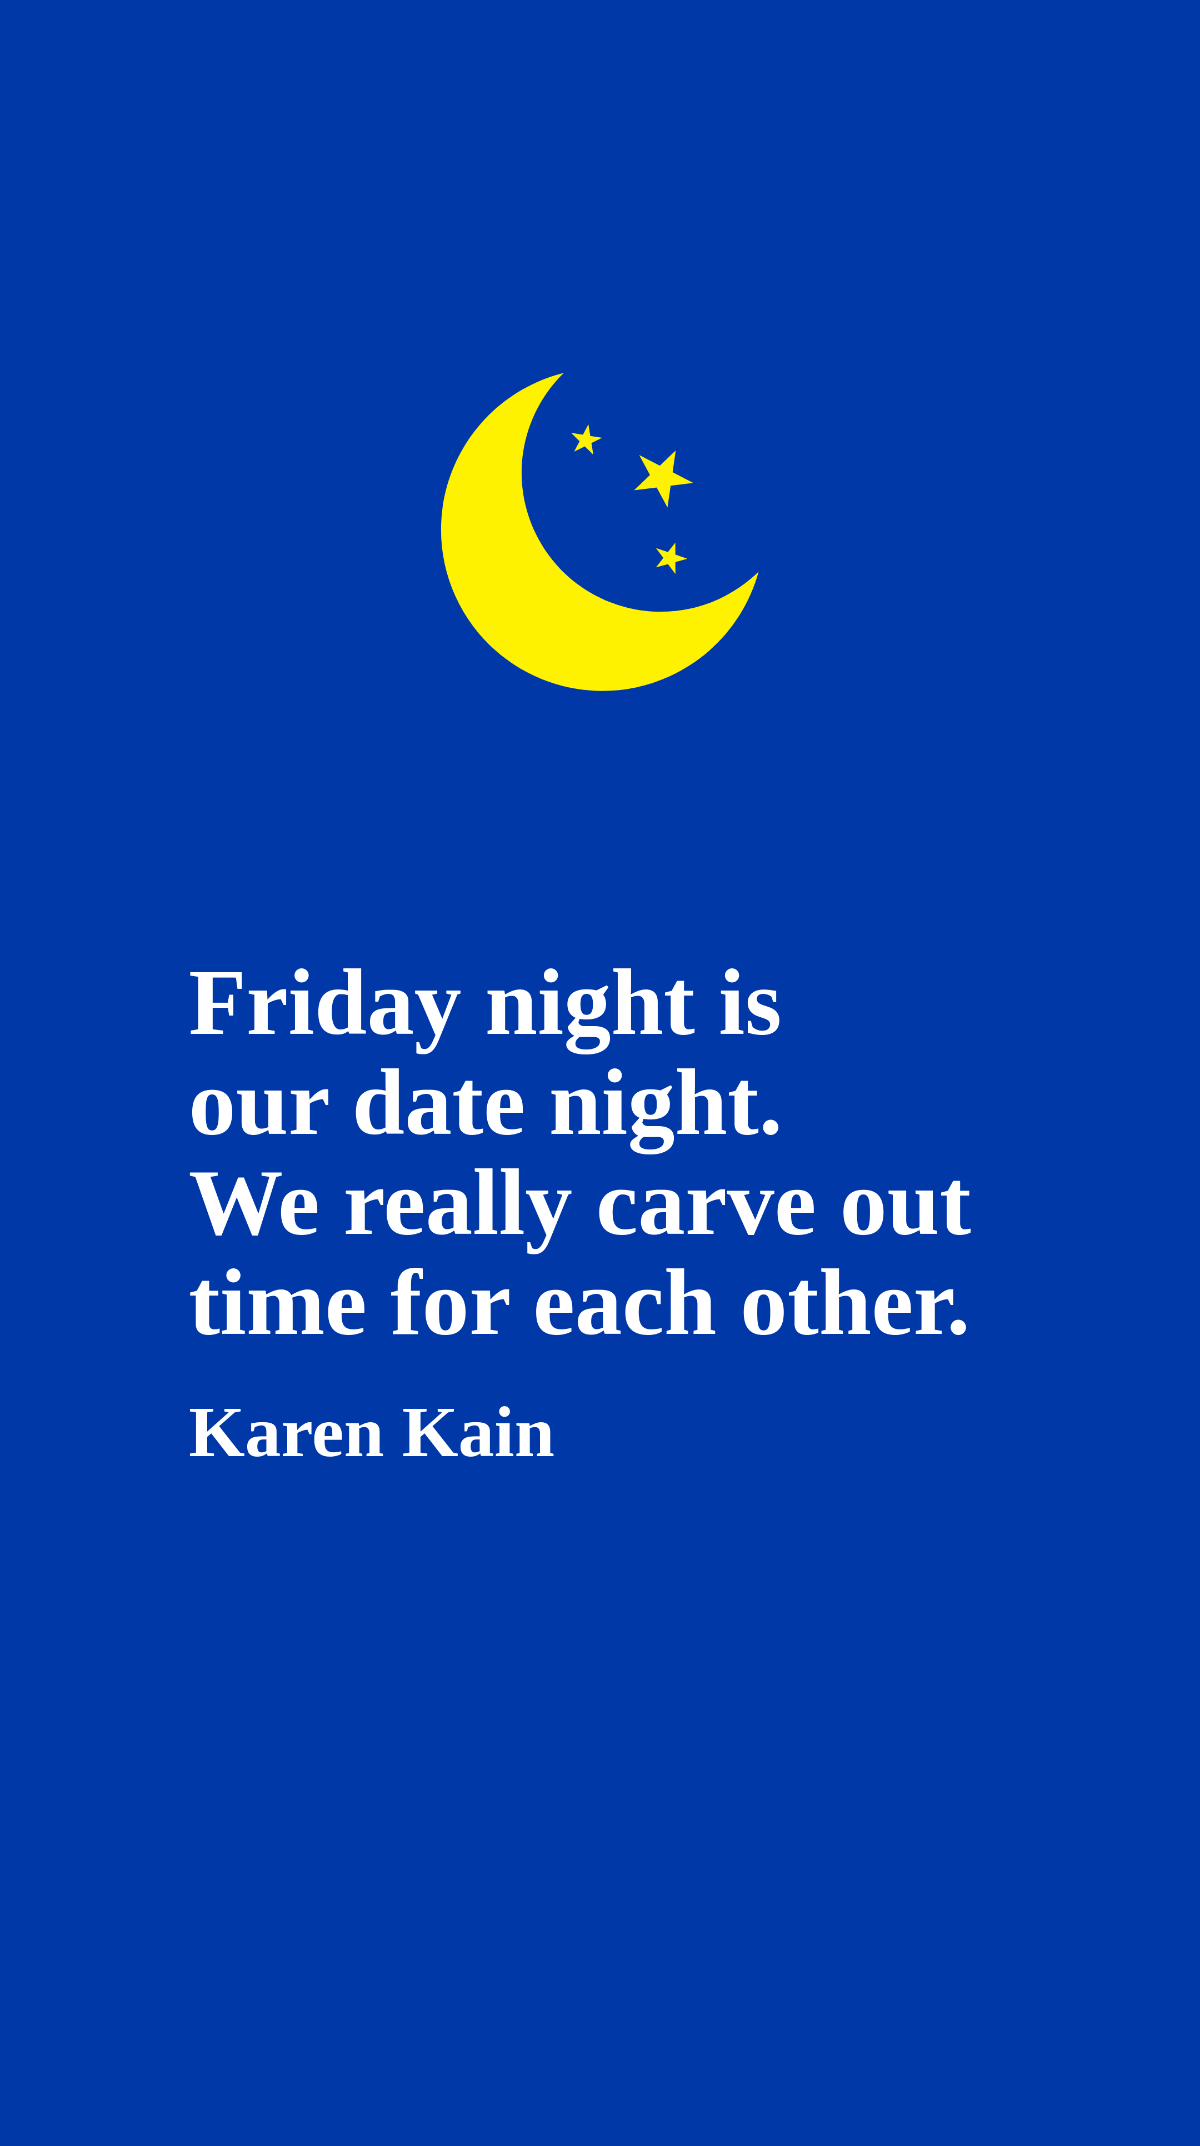 Karen Kain - Friday night is our date night. We really carve out time for each other.  Template